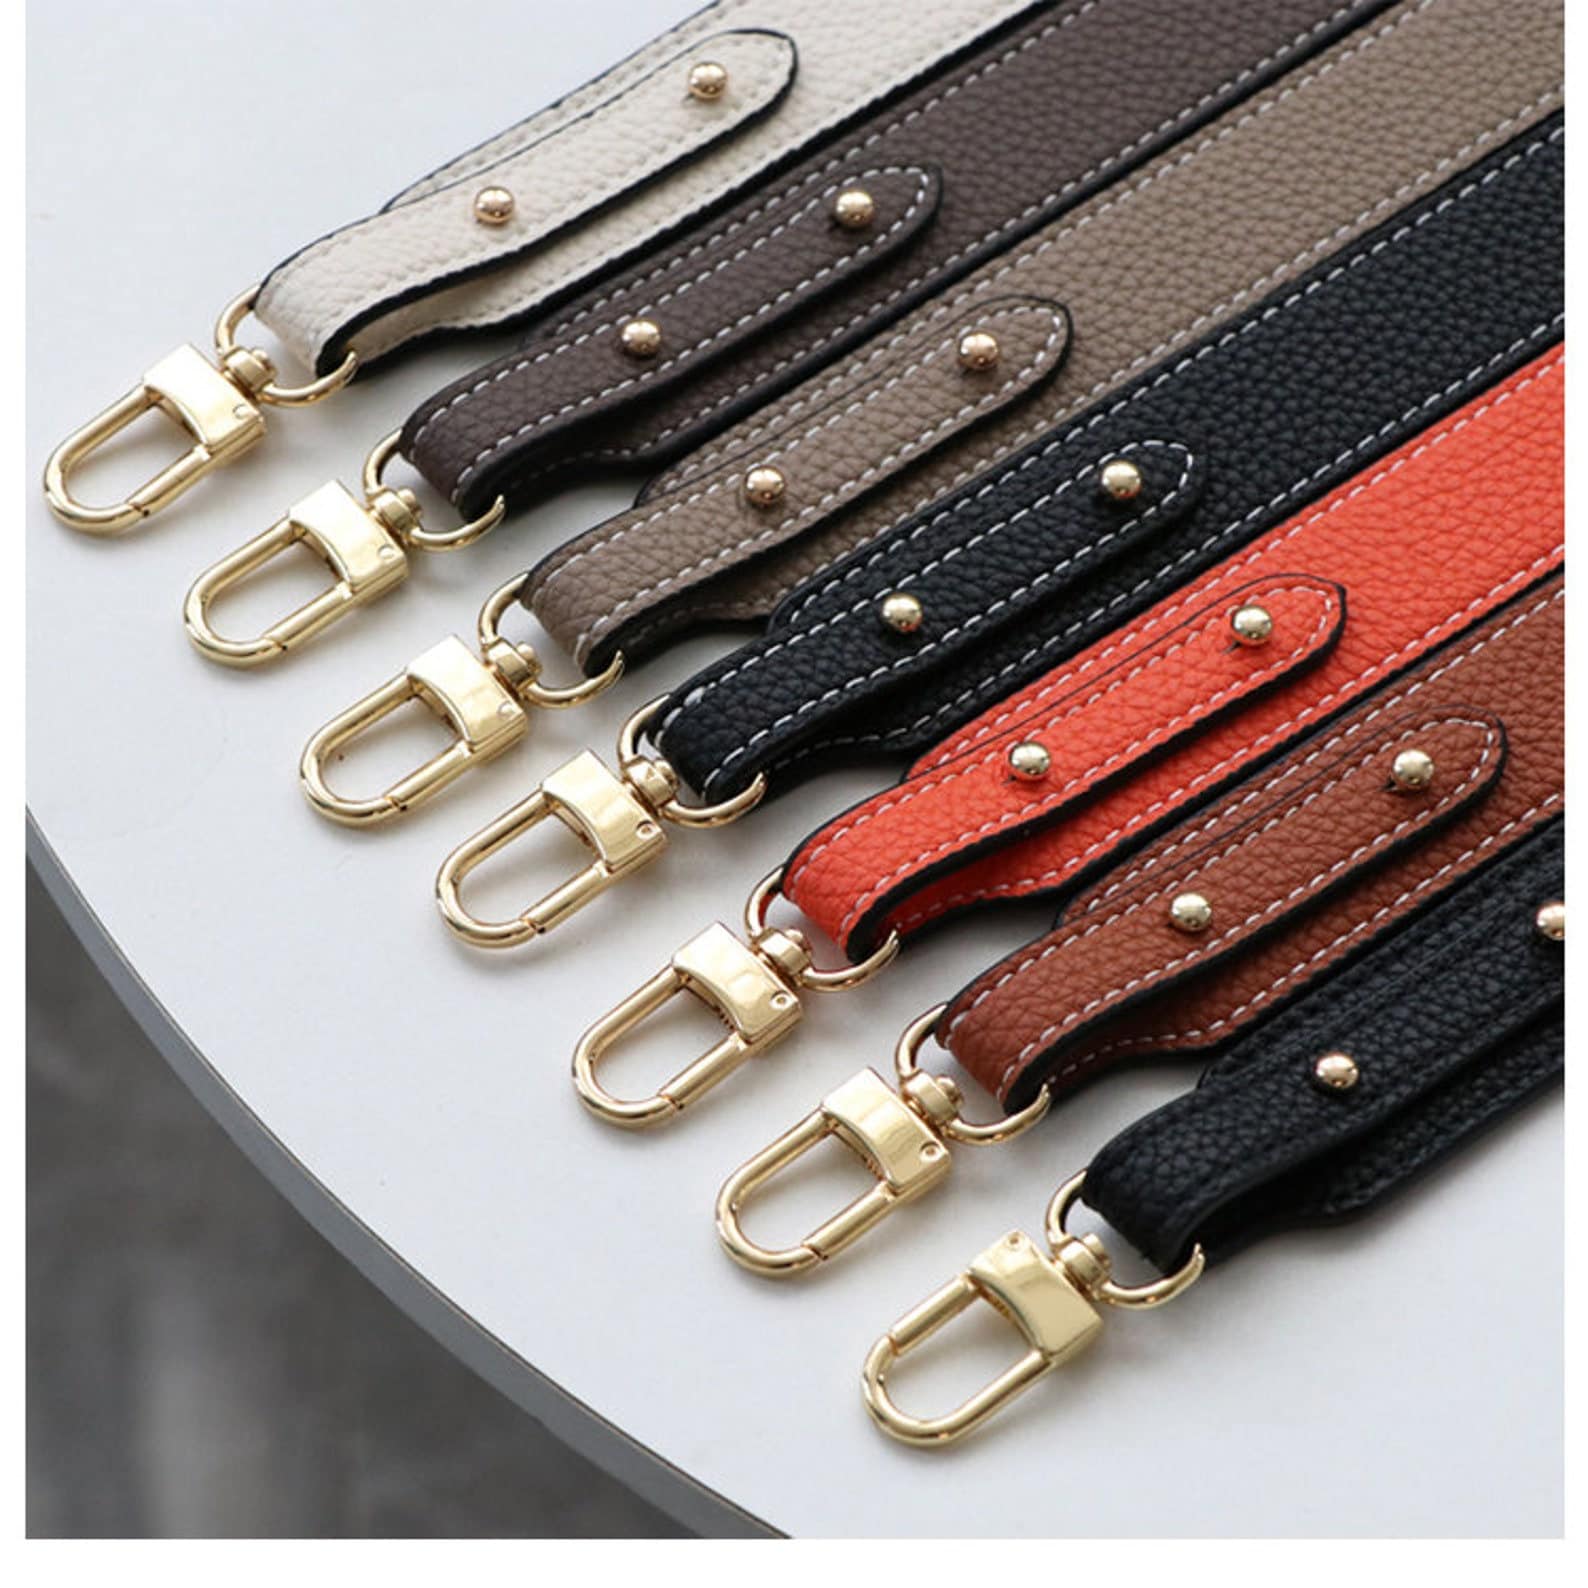 Bag Accessories Bag Straps Transformation Adjustable Canvas Shoulder Bag  Strap Crossbody Replacement Bag Belt With Accessories - AliExpress